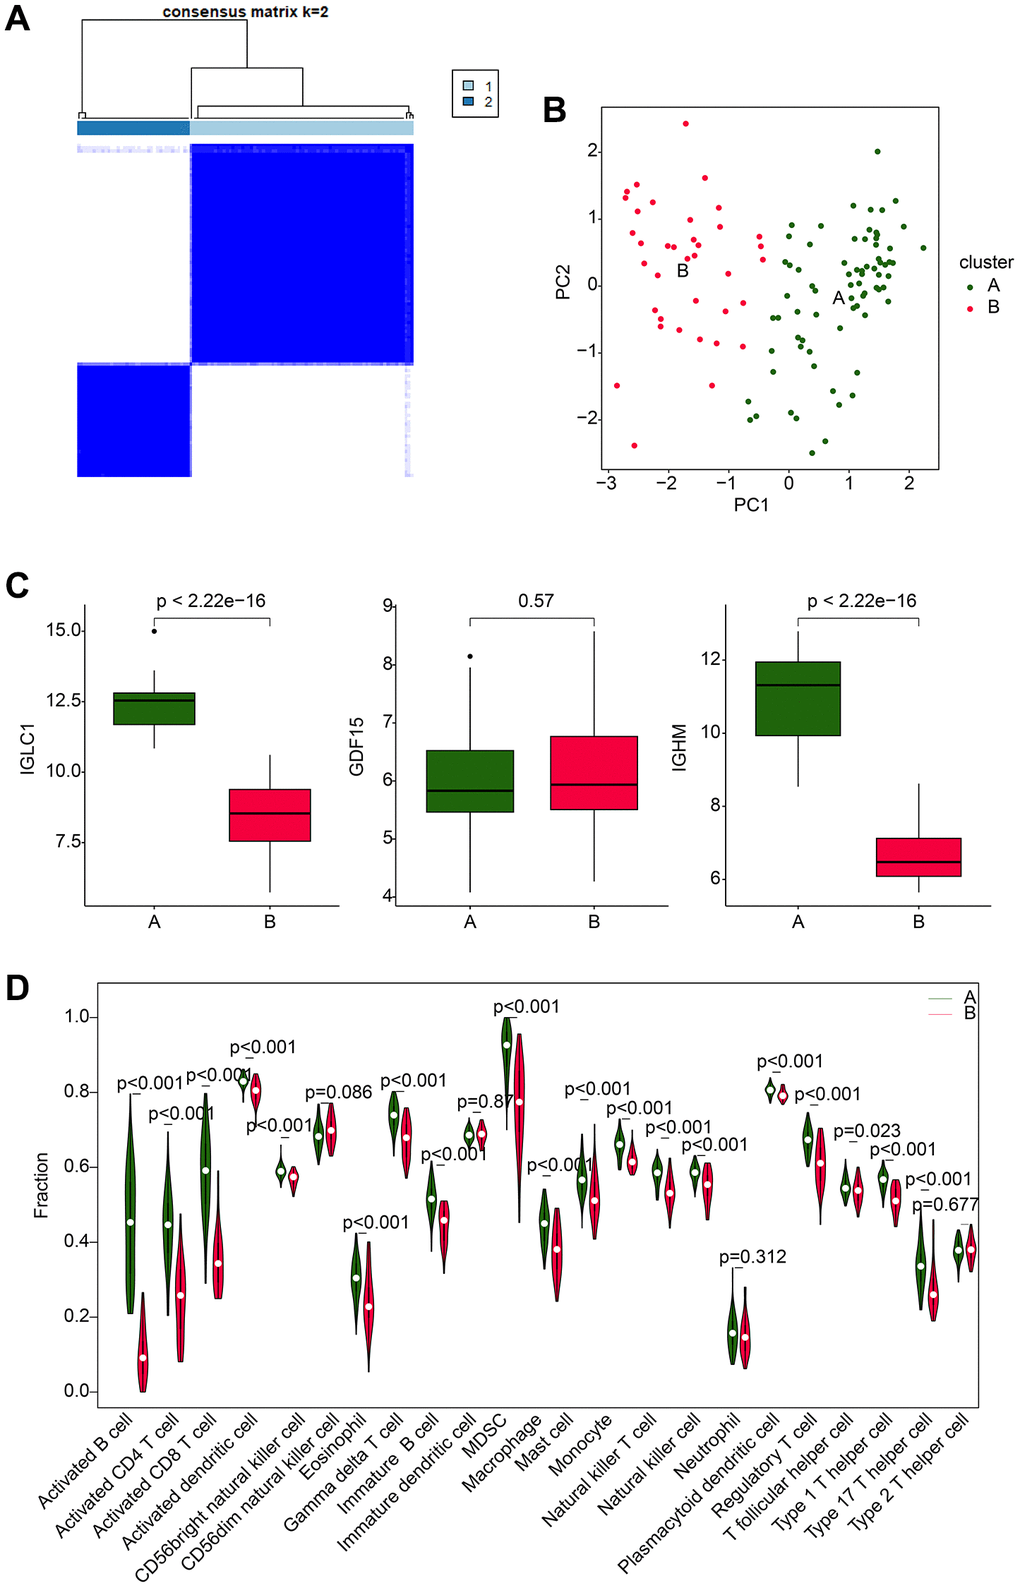 Molecular subtype analysis based on CRGs. (A) Optimal classification analysis based on consensus clustering of CRGs. (B) PCA analysis of different molecular subtypes of RA. (C) Expression analysis of IGLC1, IGHM, and GDF15 in different molecular subtypes. (D) Analysis of immune infiltration characteristics in molecular subtypes of RA samples.